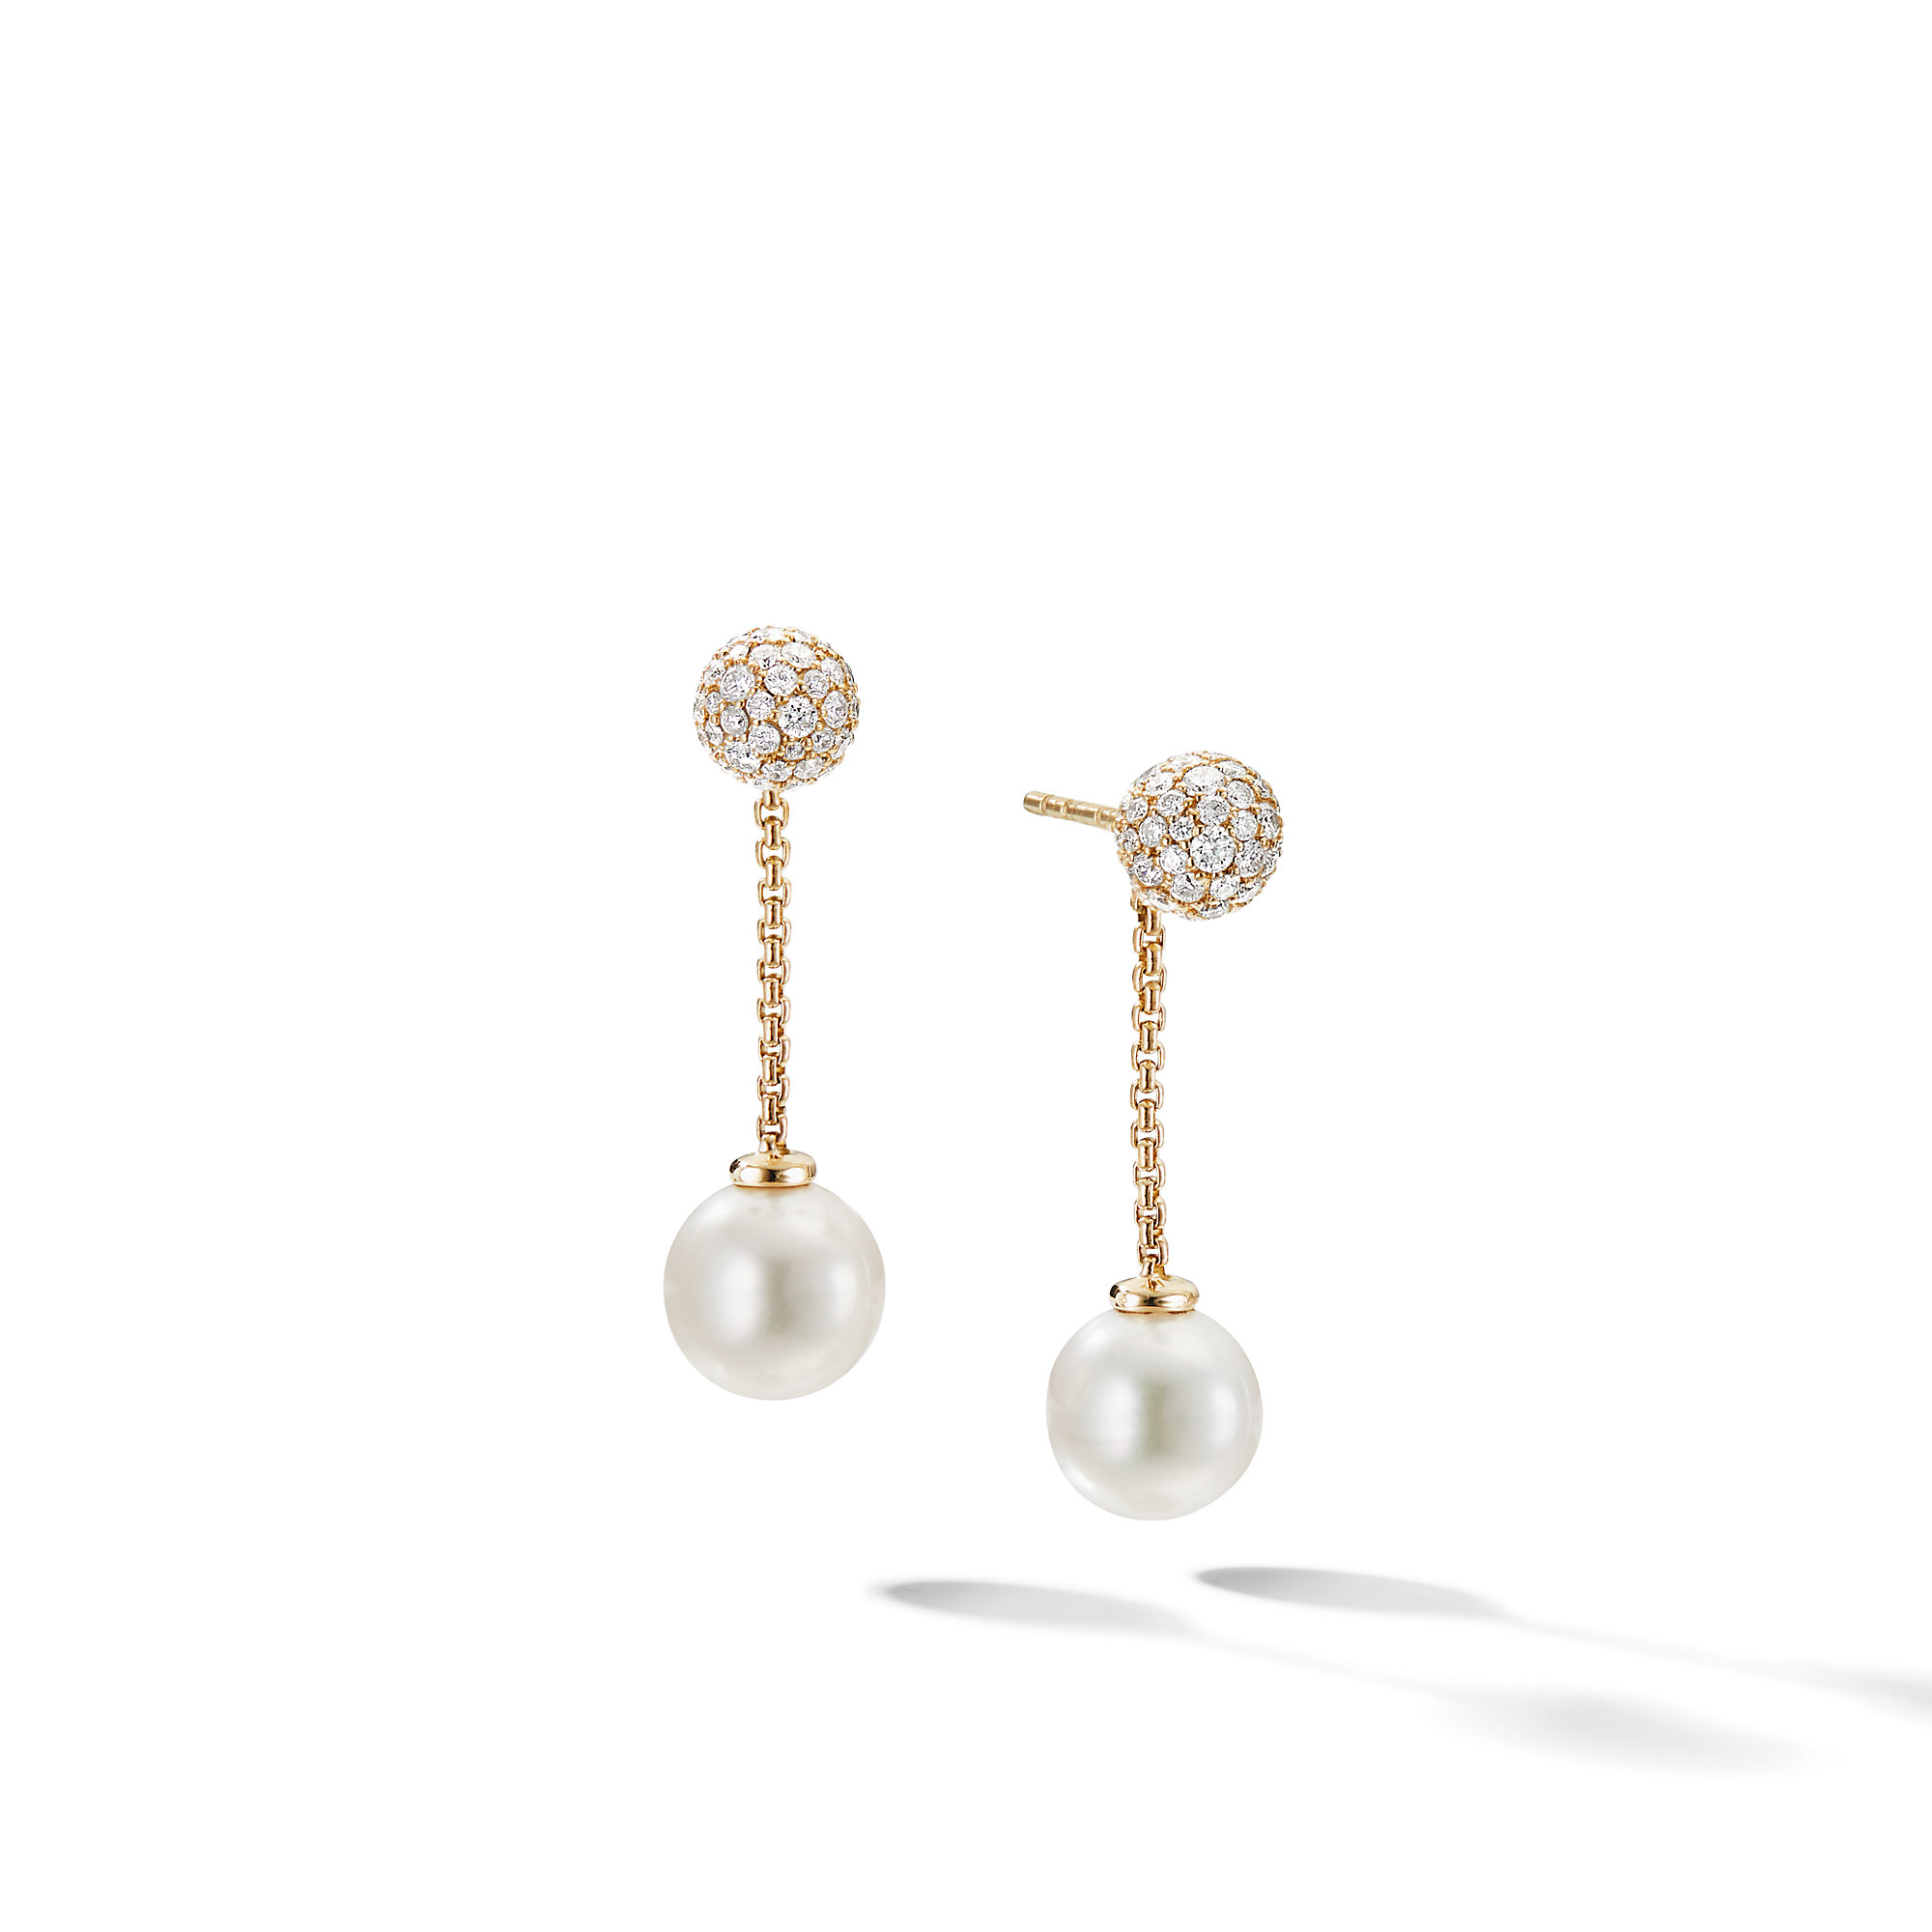 Solari Chain Drop Earrings in 18K Yellow Gold with Pearls and Pave Diamonds